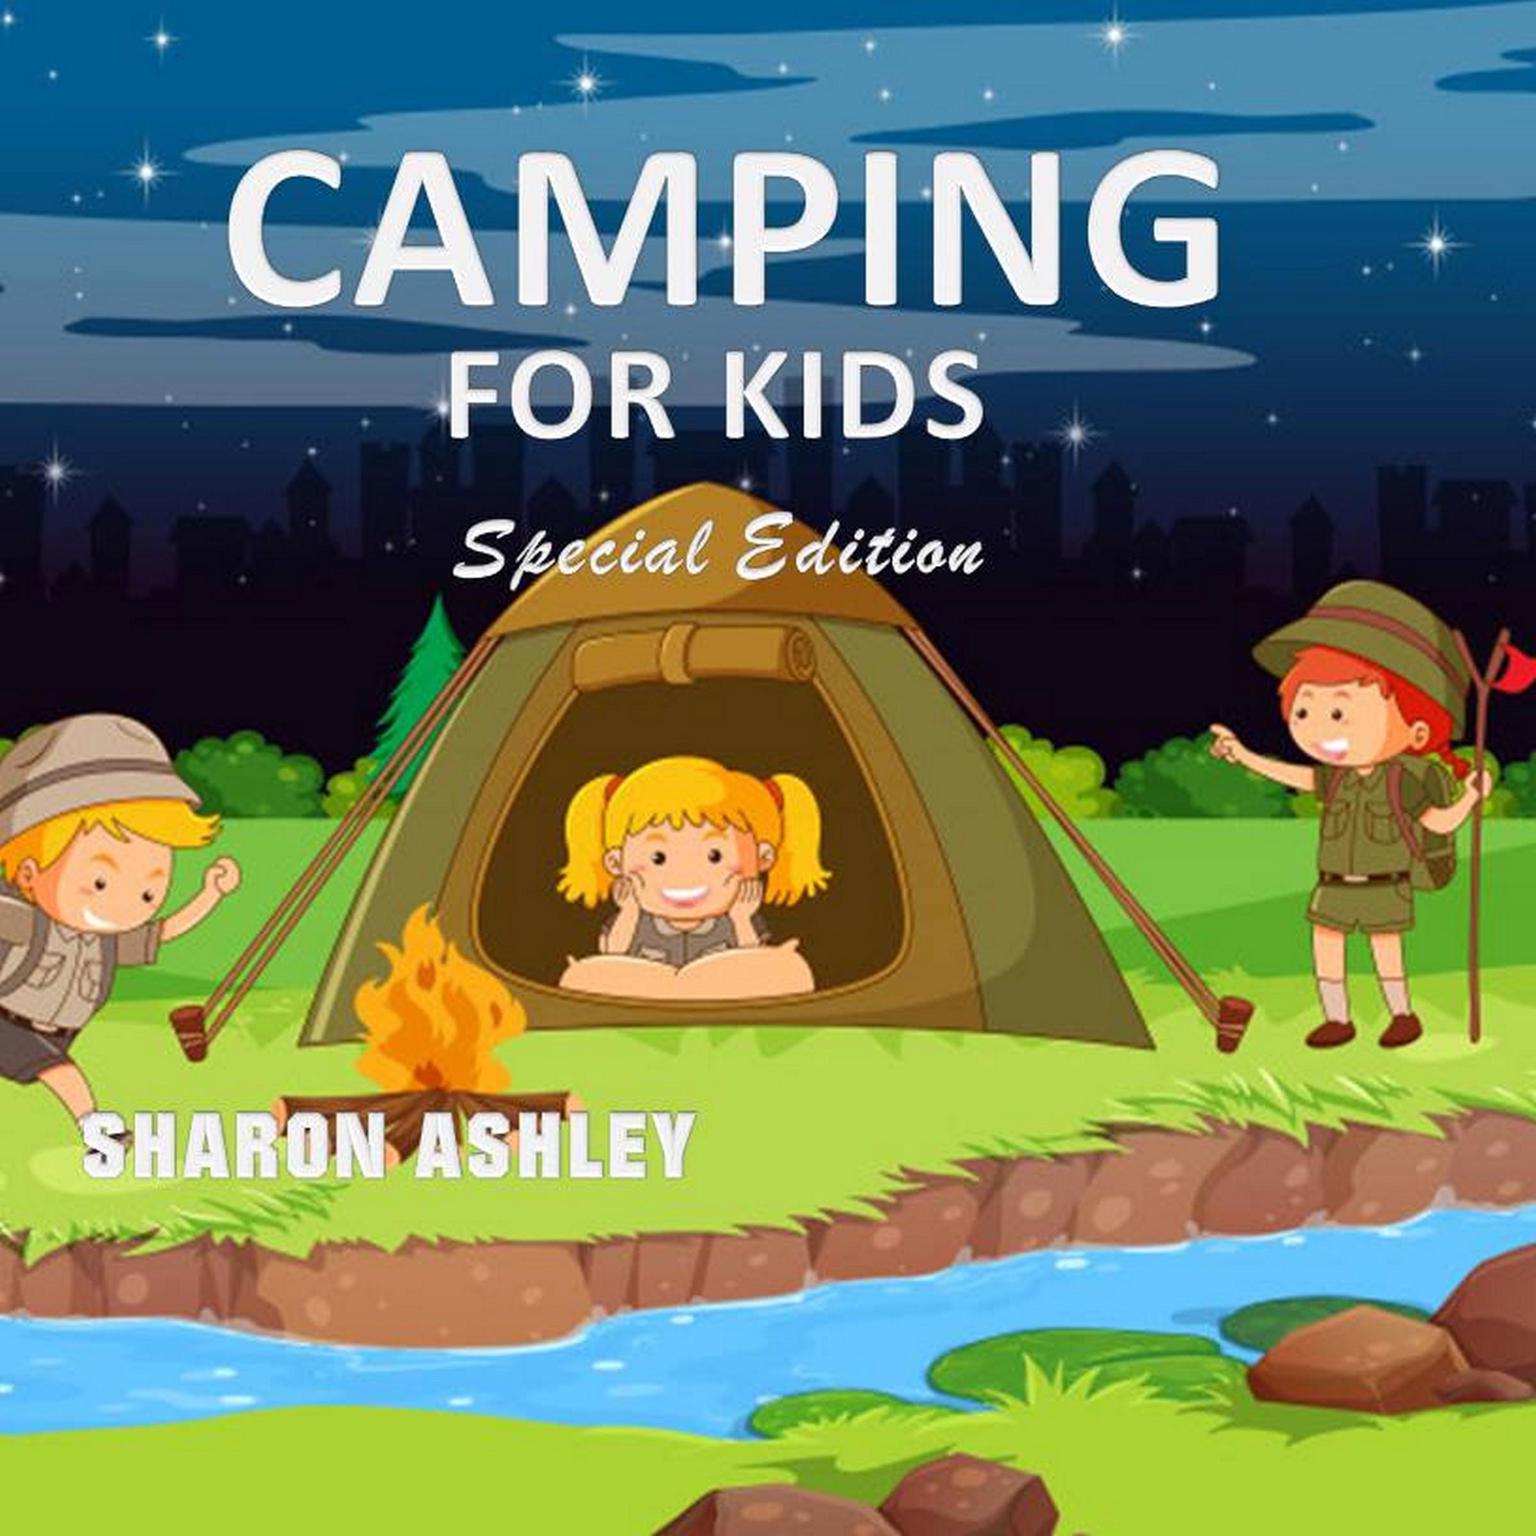 Camping for Kids (Special Edition) Audiobook, by Sharon Ashley